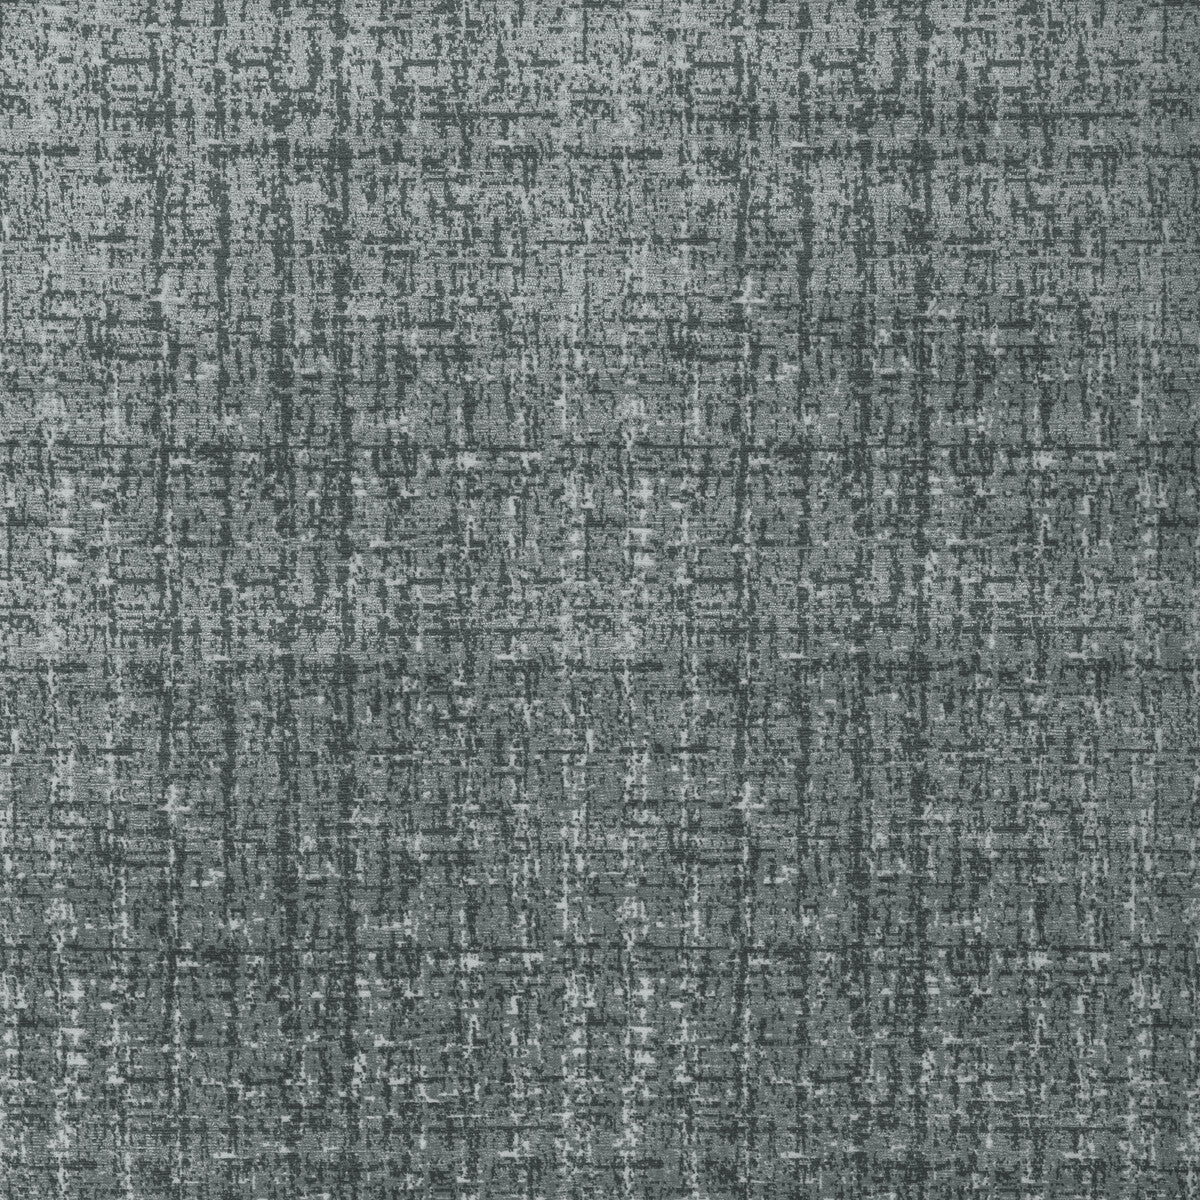 Embody fabric in charcoal color - pattern 36575.1121.0 - by Kravet Couture in the Modern Luxe Silk Luster collection